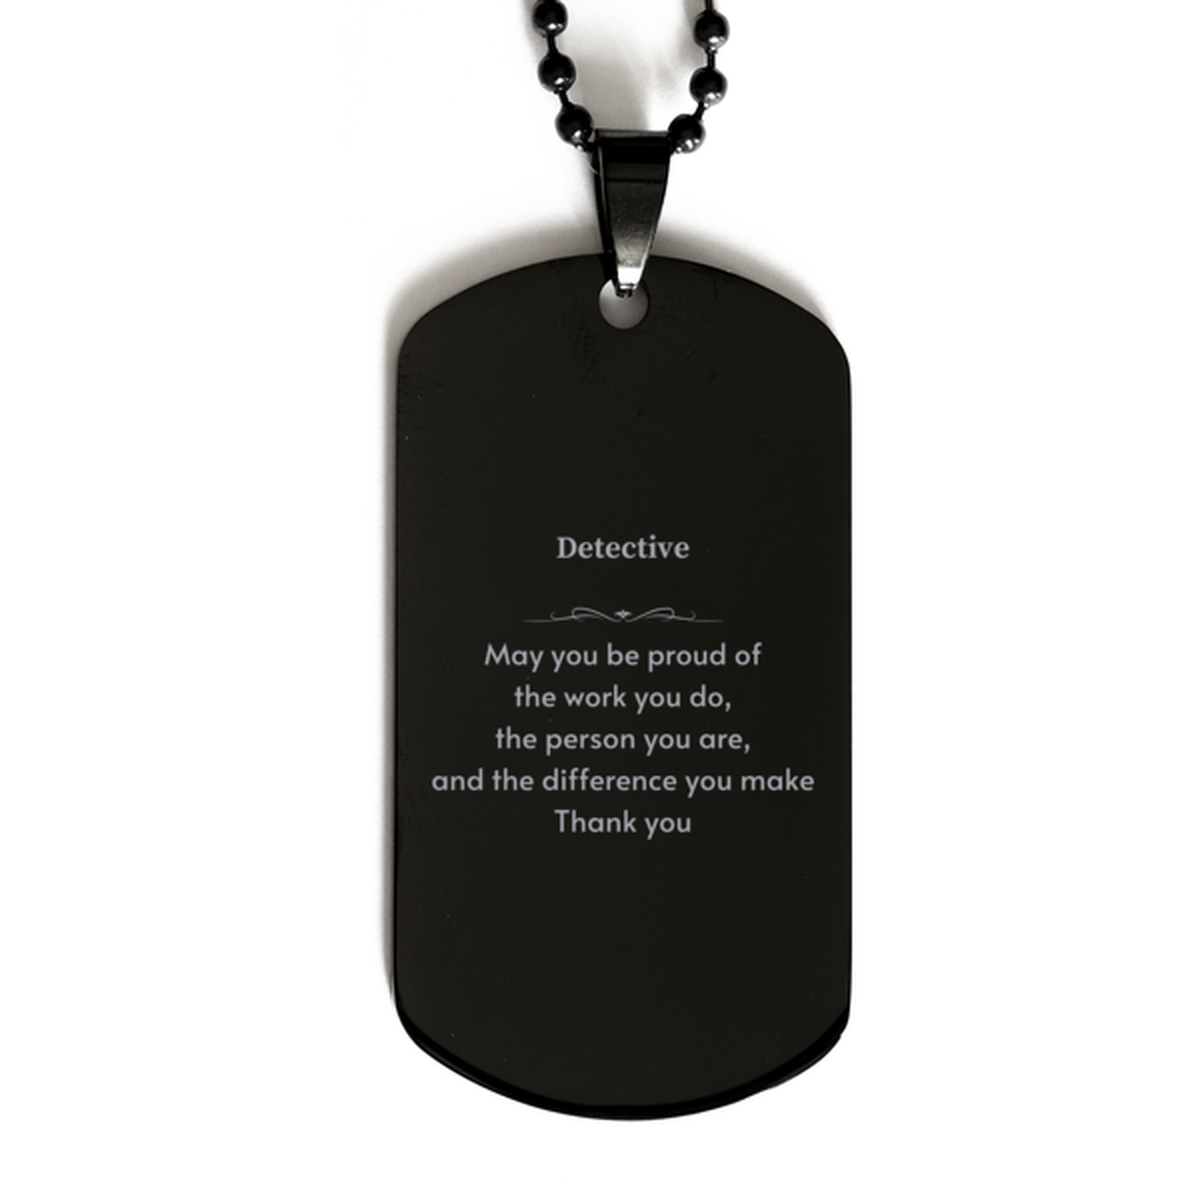 Heartwarming Black Dog Tag Retirement Coworkers Gifts for Detective, Detective May You be proud of the work you do, the person you are Gifts for Boss Men Women Friends